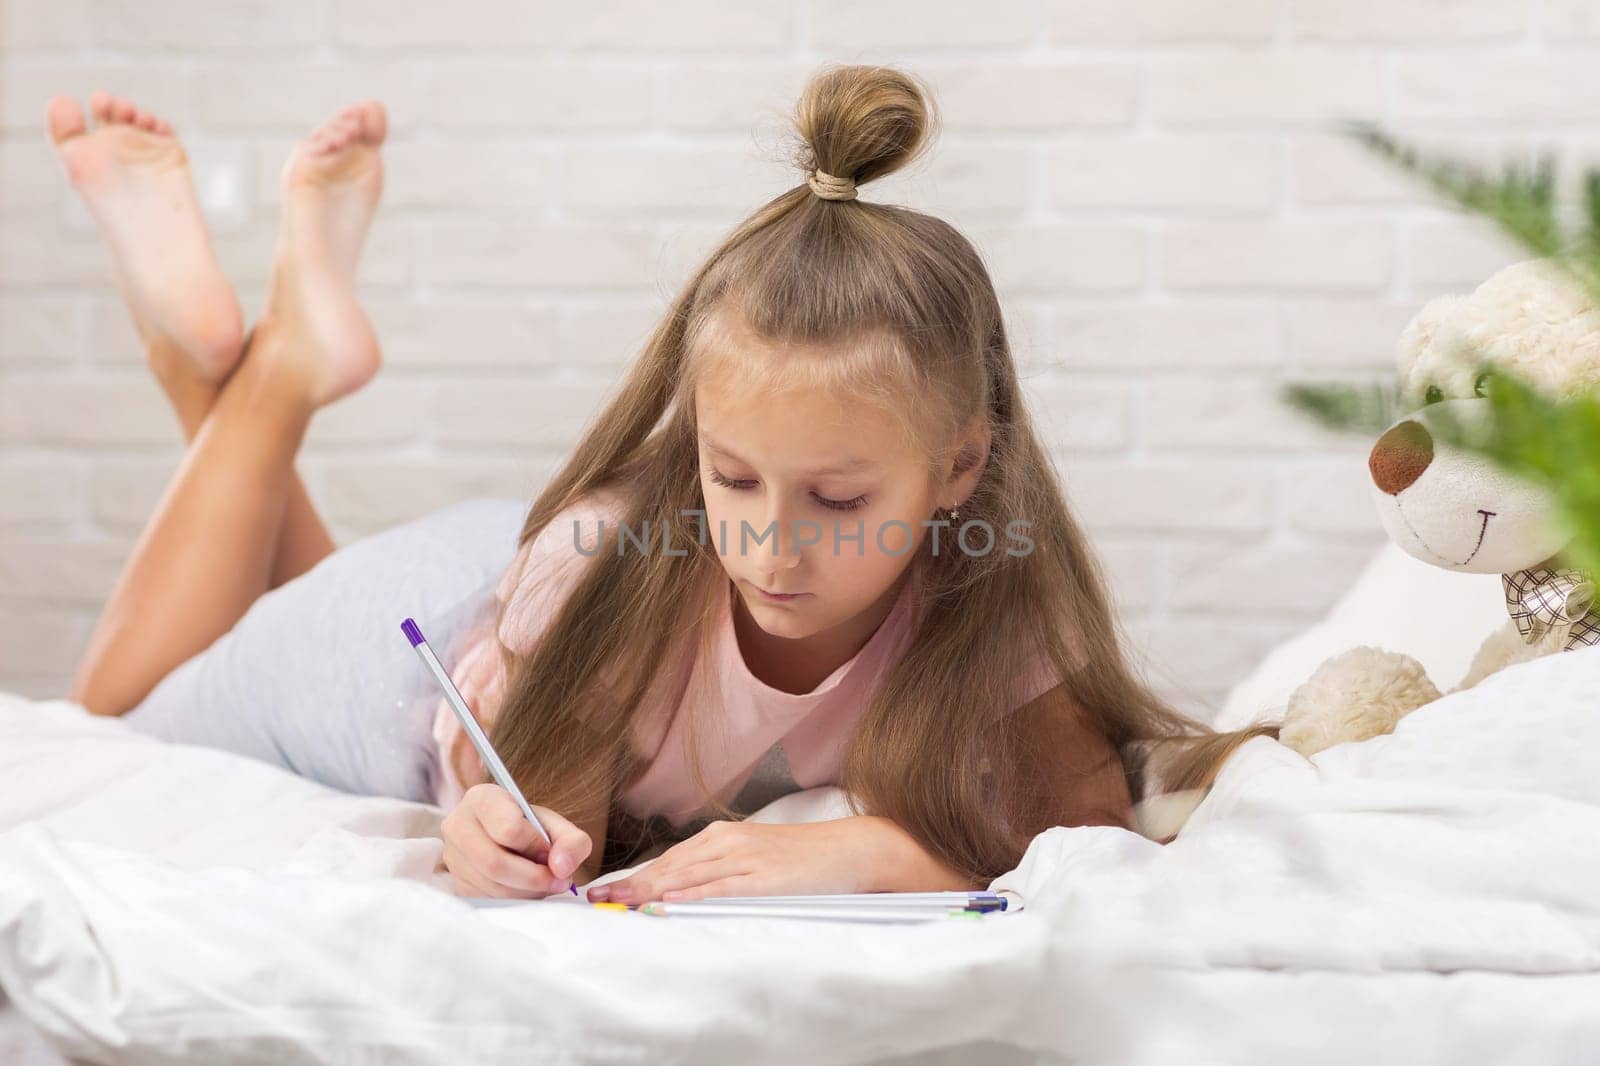 cute little girl drawing pictures while lying on bed. Kid painting at home. happy morning